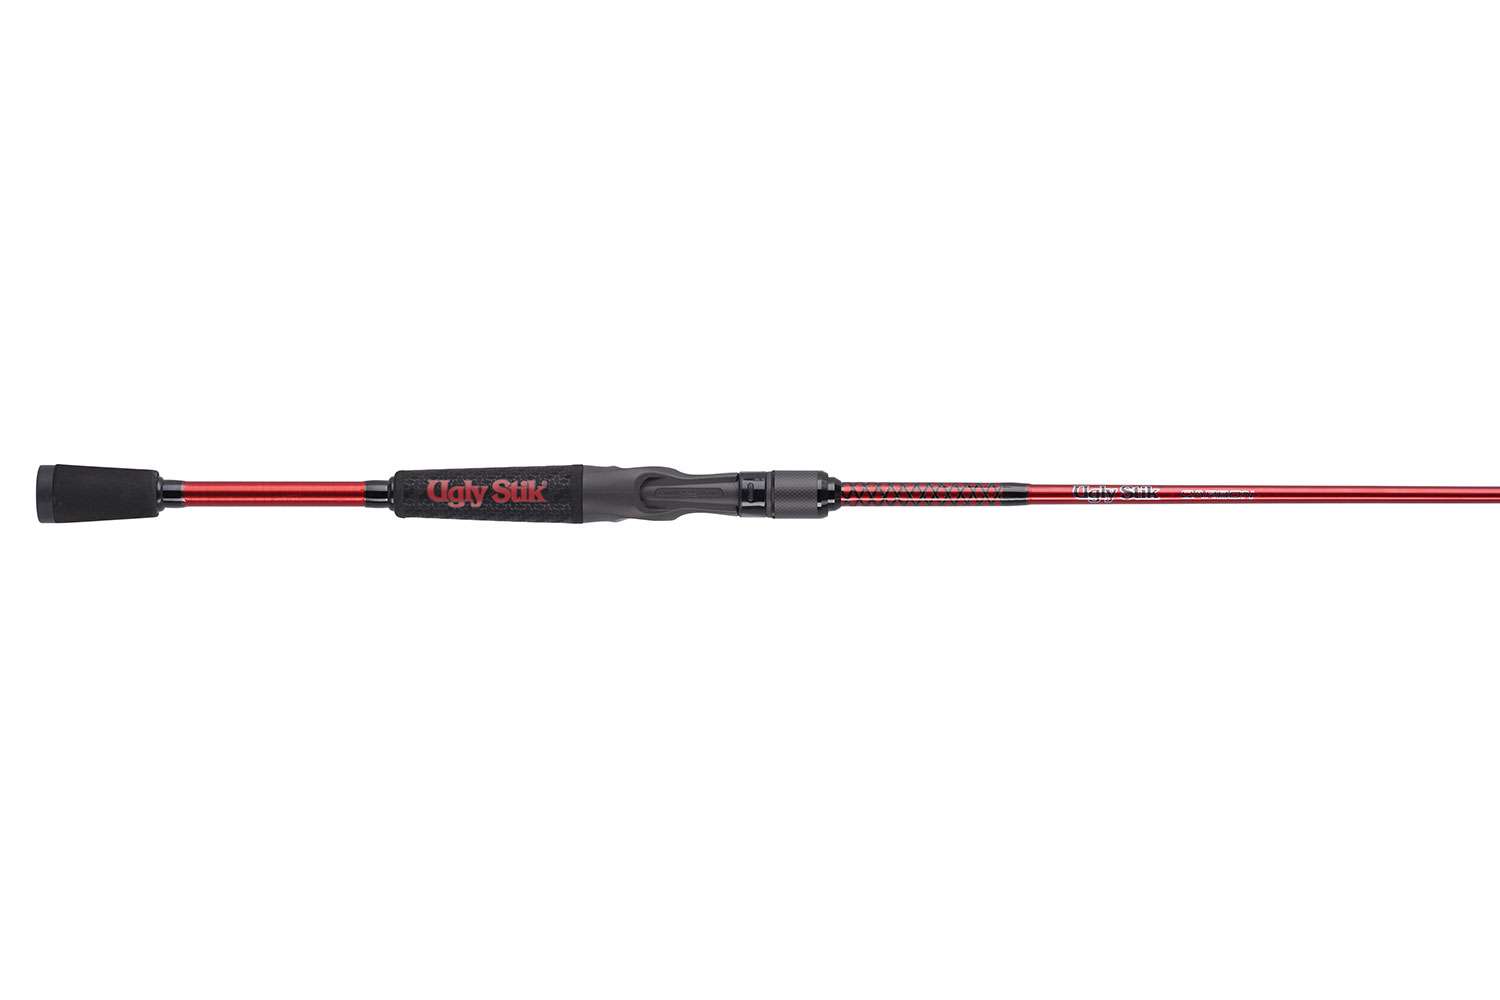     <B>Ugly Stik Carbon </B>
<BR>One hundred percent Ugly, 100 percent Carbon; the lightest Ugly Stik ever! Introducing the new Ugly Stik Carbon series featuring 100 percent graphite for a lightweight rod, crisp actions, and increased sensitivity while maintaining the legendary toughness you've come to expect from Ugly Stik. Ugly Stik Carbon rods are an average of 37-percent stronger than traditional cut and roll construction graphite rods. 
<BR>
<B>MSRP: $79.95</B>
